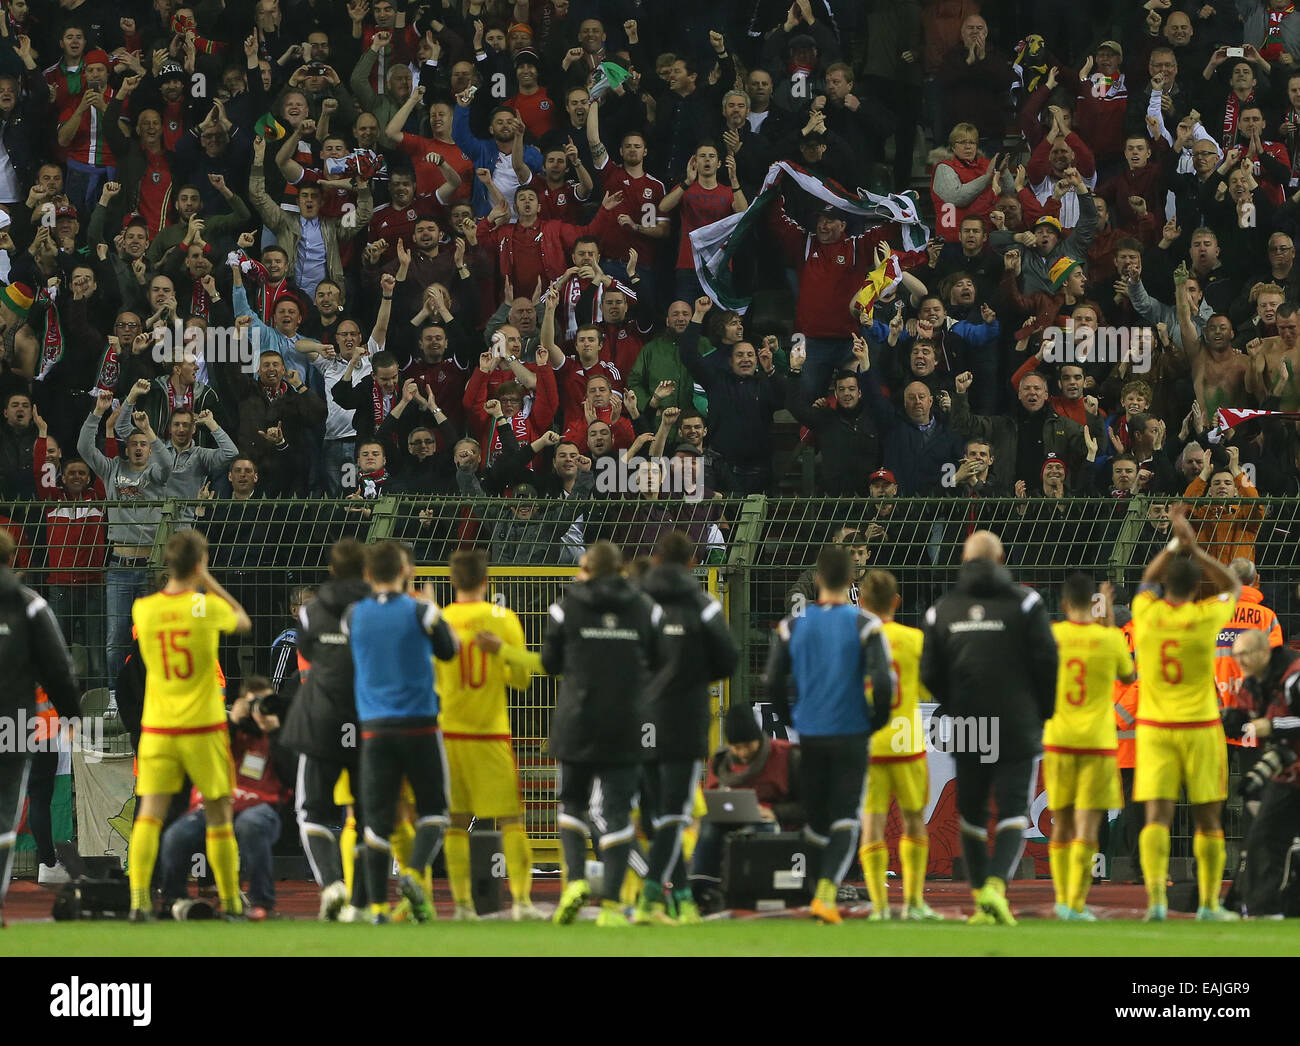 Brussels, Belgium. 16th Nov, 2014. Wales' fans celebrate at the final whistle.- European Qualifier - Belgium vs Wales- Heysel Stadium - Brussels - Belgium - 16th November 2014 - Picture David Klein/Sportimage. Credit:  csm/Alamy Live News Stock Photo